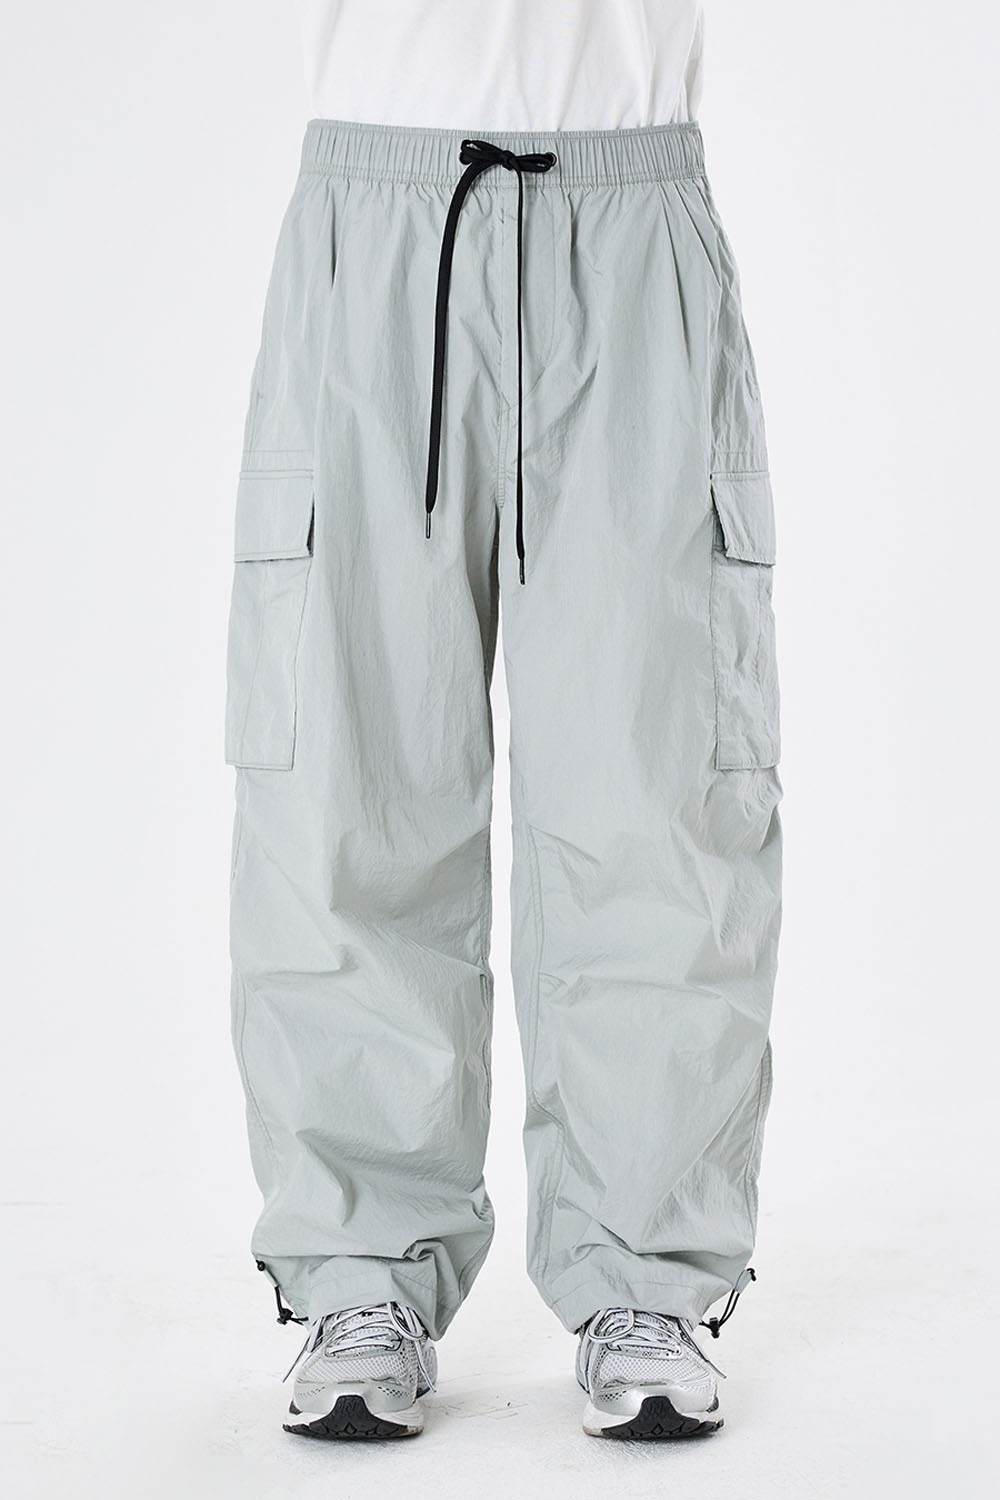 Over Mil 6p Pants-Silver Ripstop